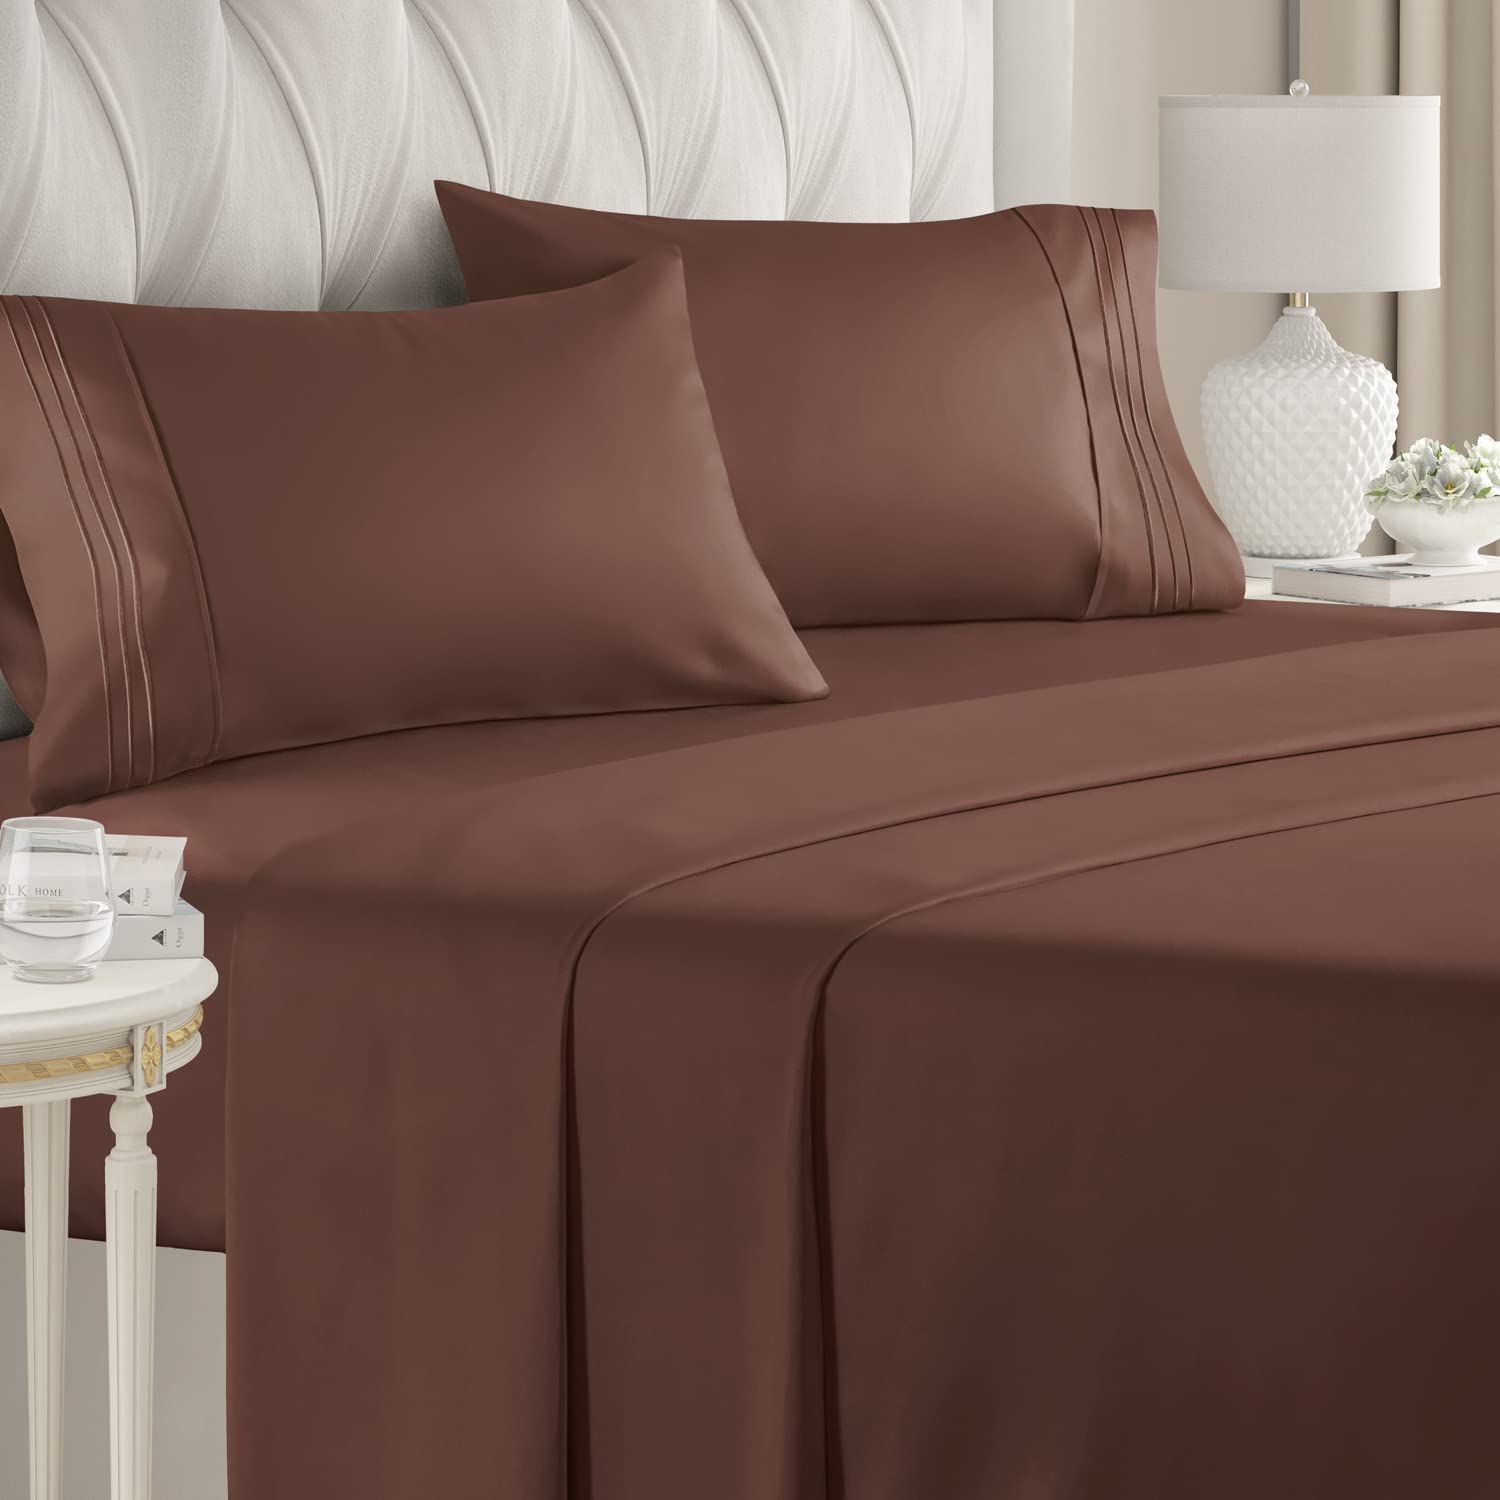 Book Cover Full Size Sheet Set - Breathable & Cooling Sheets - Hotel Luxury Bed Sheets - Extra Soft - Deep Pockets - Easy Fit - 4 Piece Set - Wrinkle Free - Comfy – Brown Chocolate Bed Sheets - Fulls Sheets 15 - Brown Full